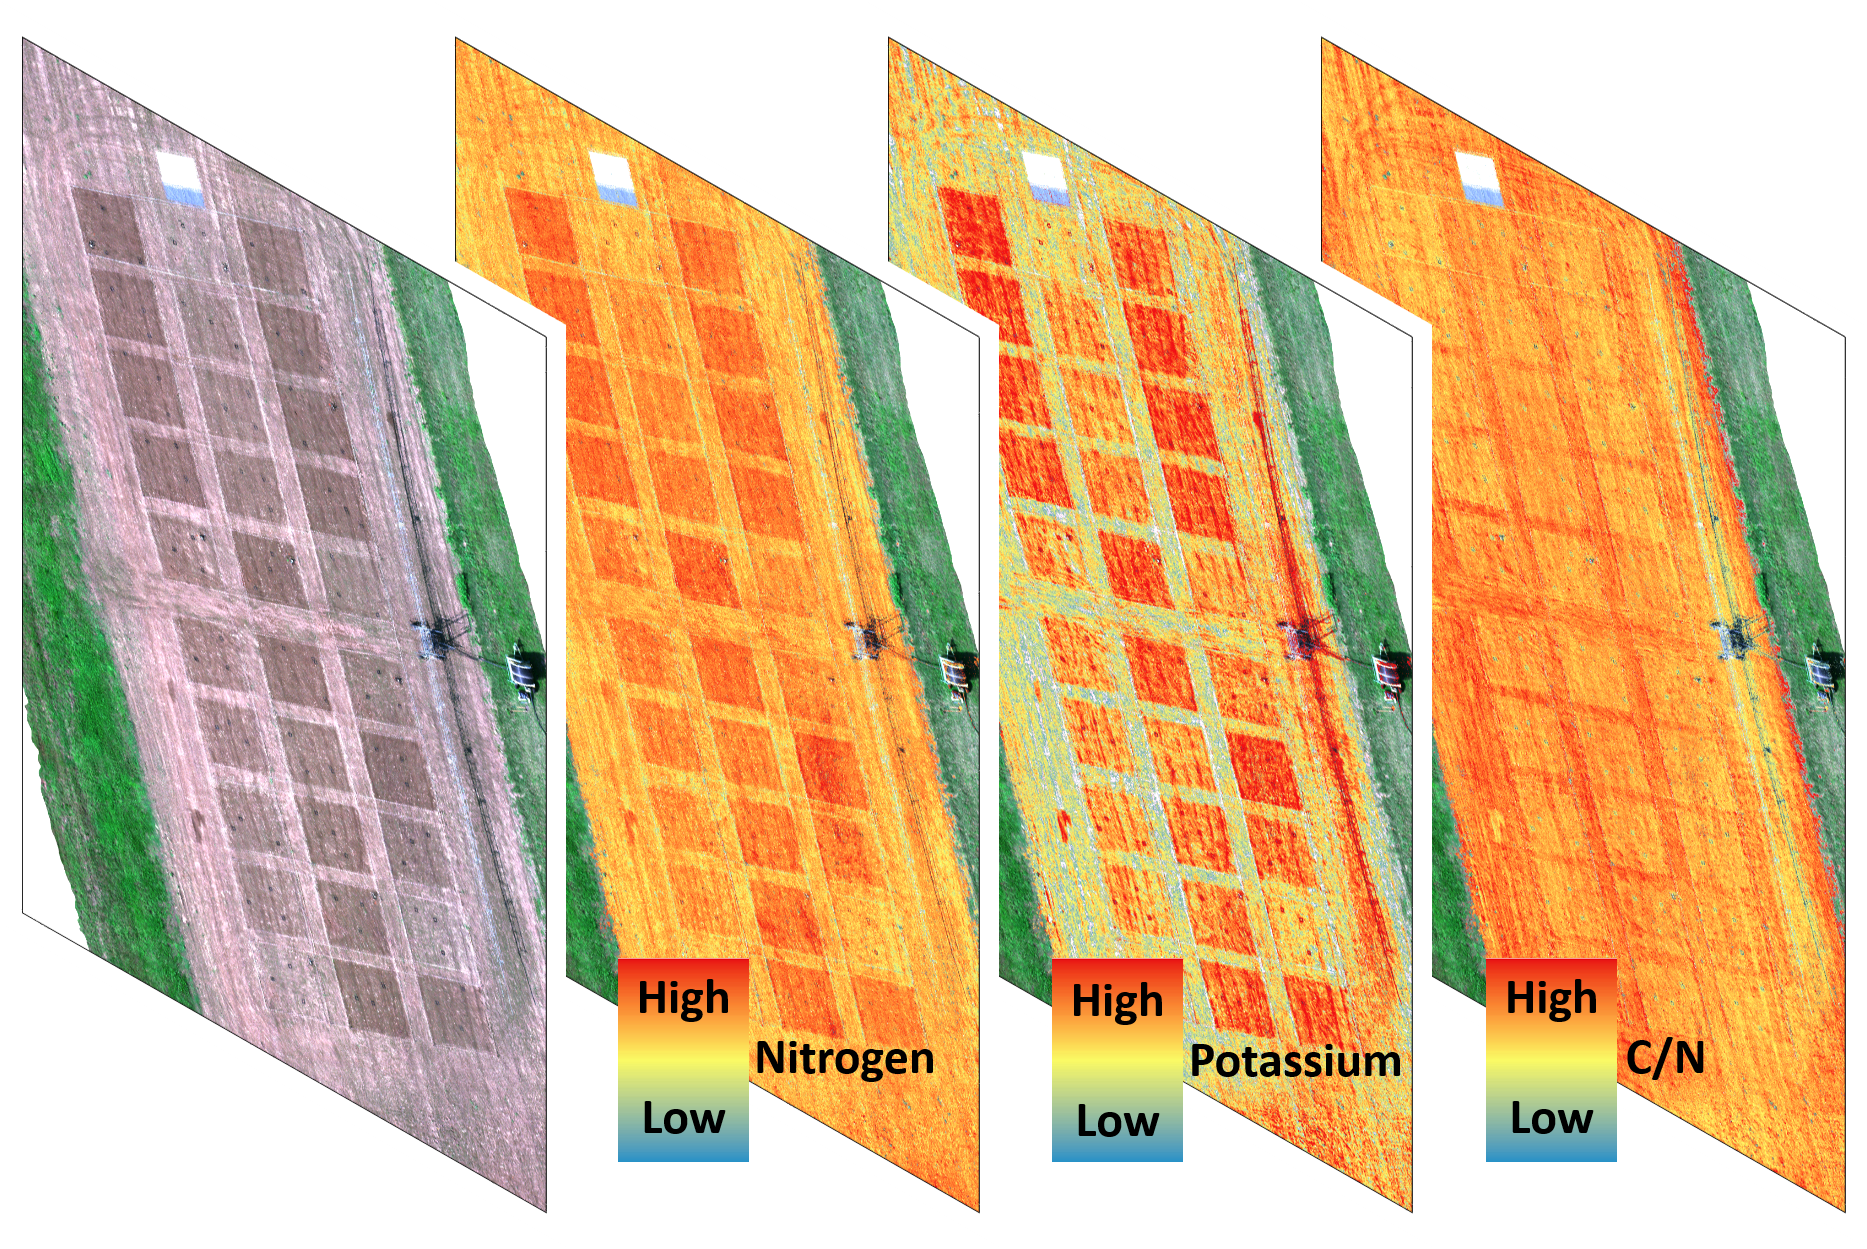 Creation of pedological parameter maps using hyperspectral remote sensing and soil sensors.